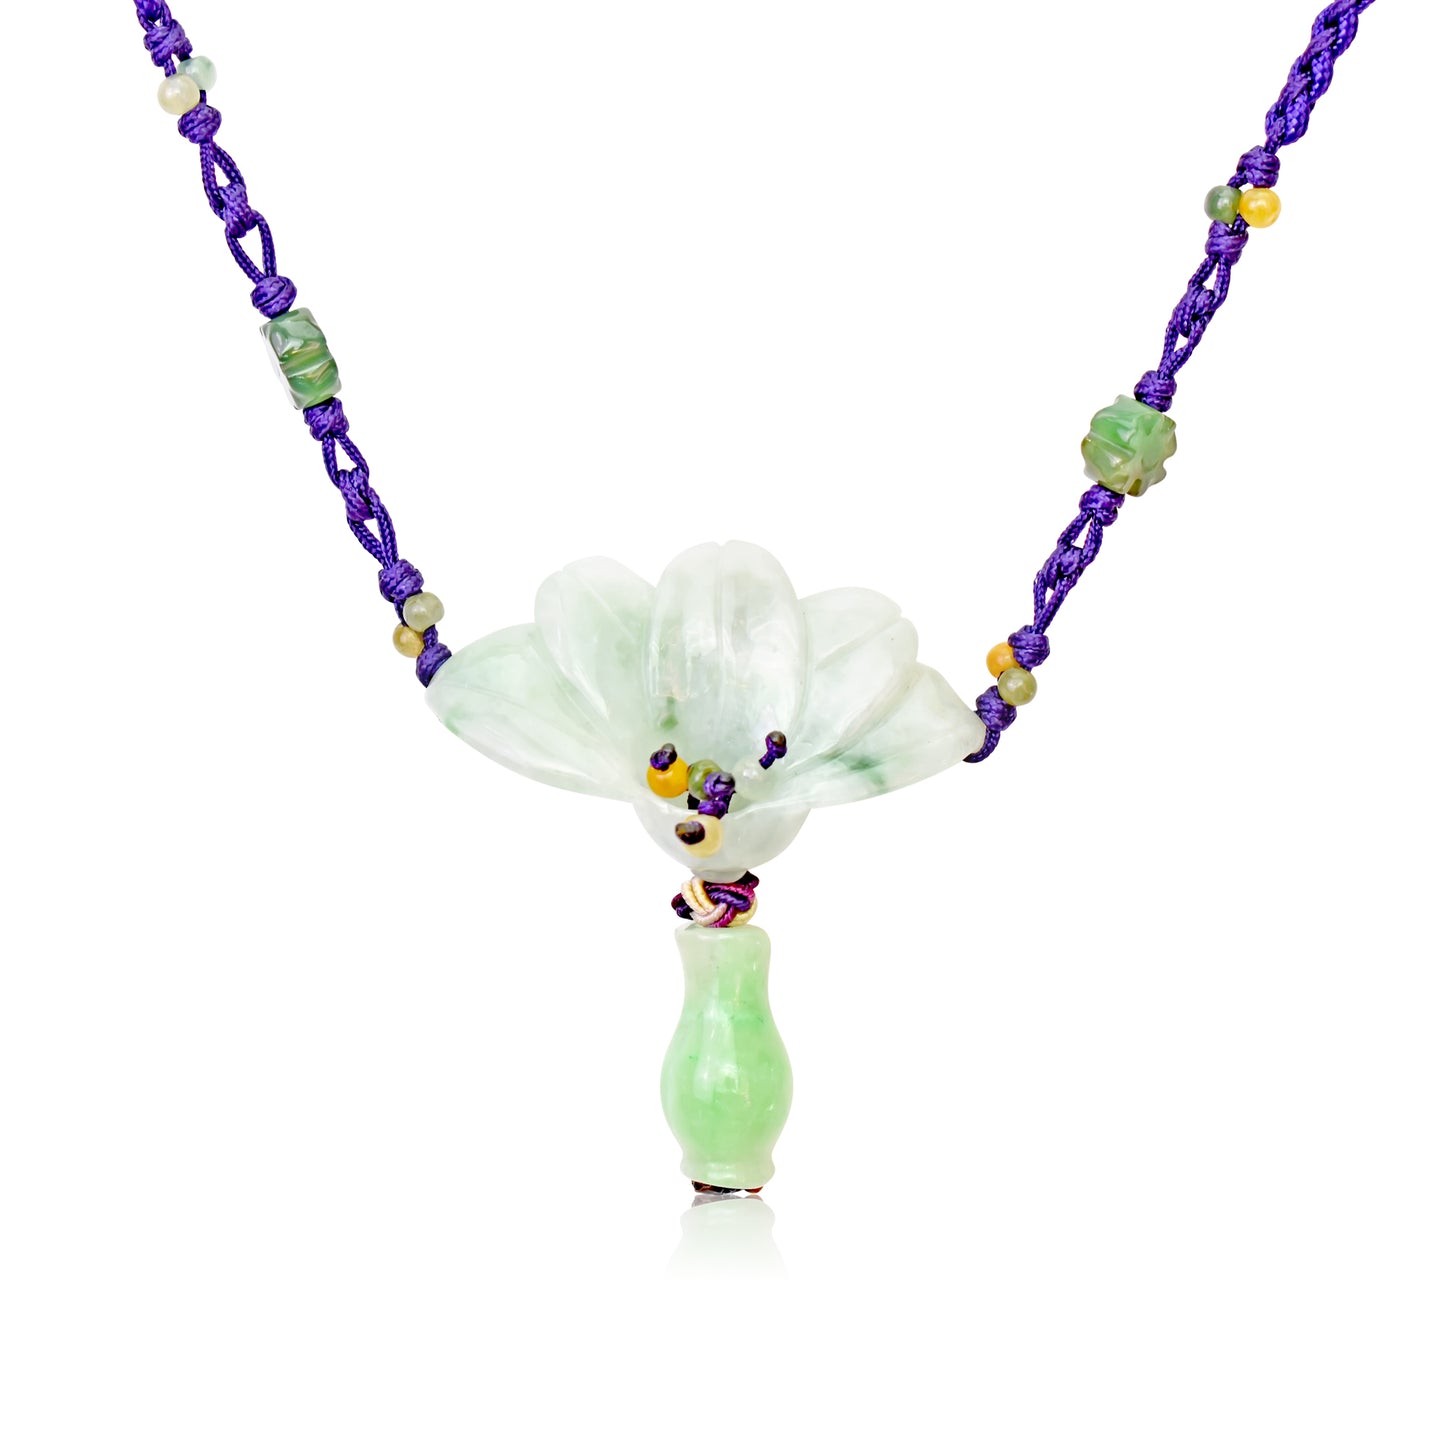 Achieve Beauty and Integrity with Peacock Flower Jade Necklace with Purple Cord